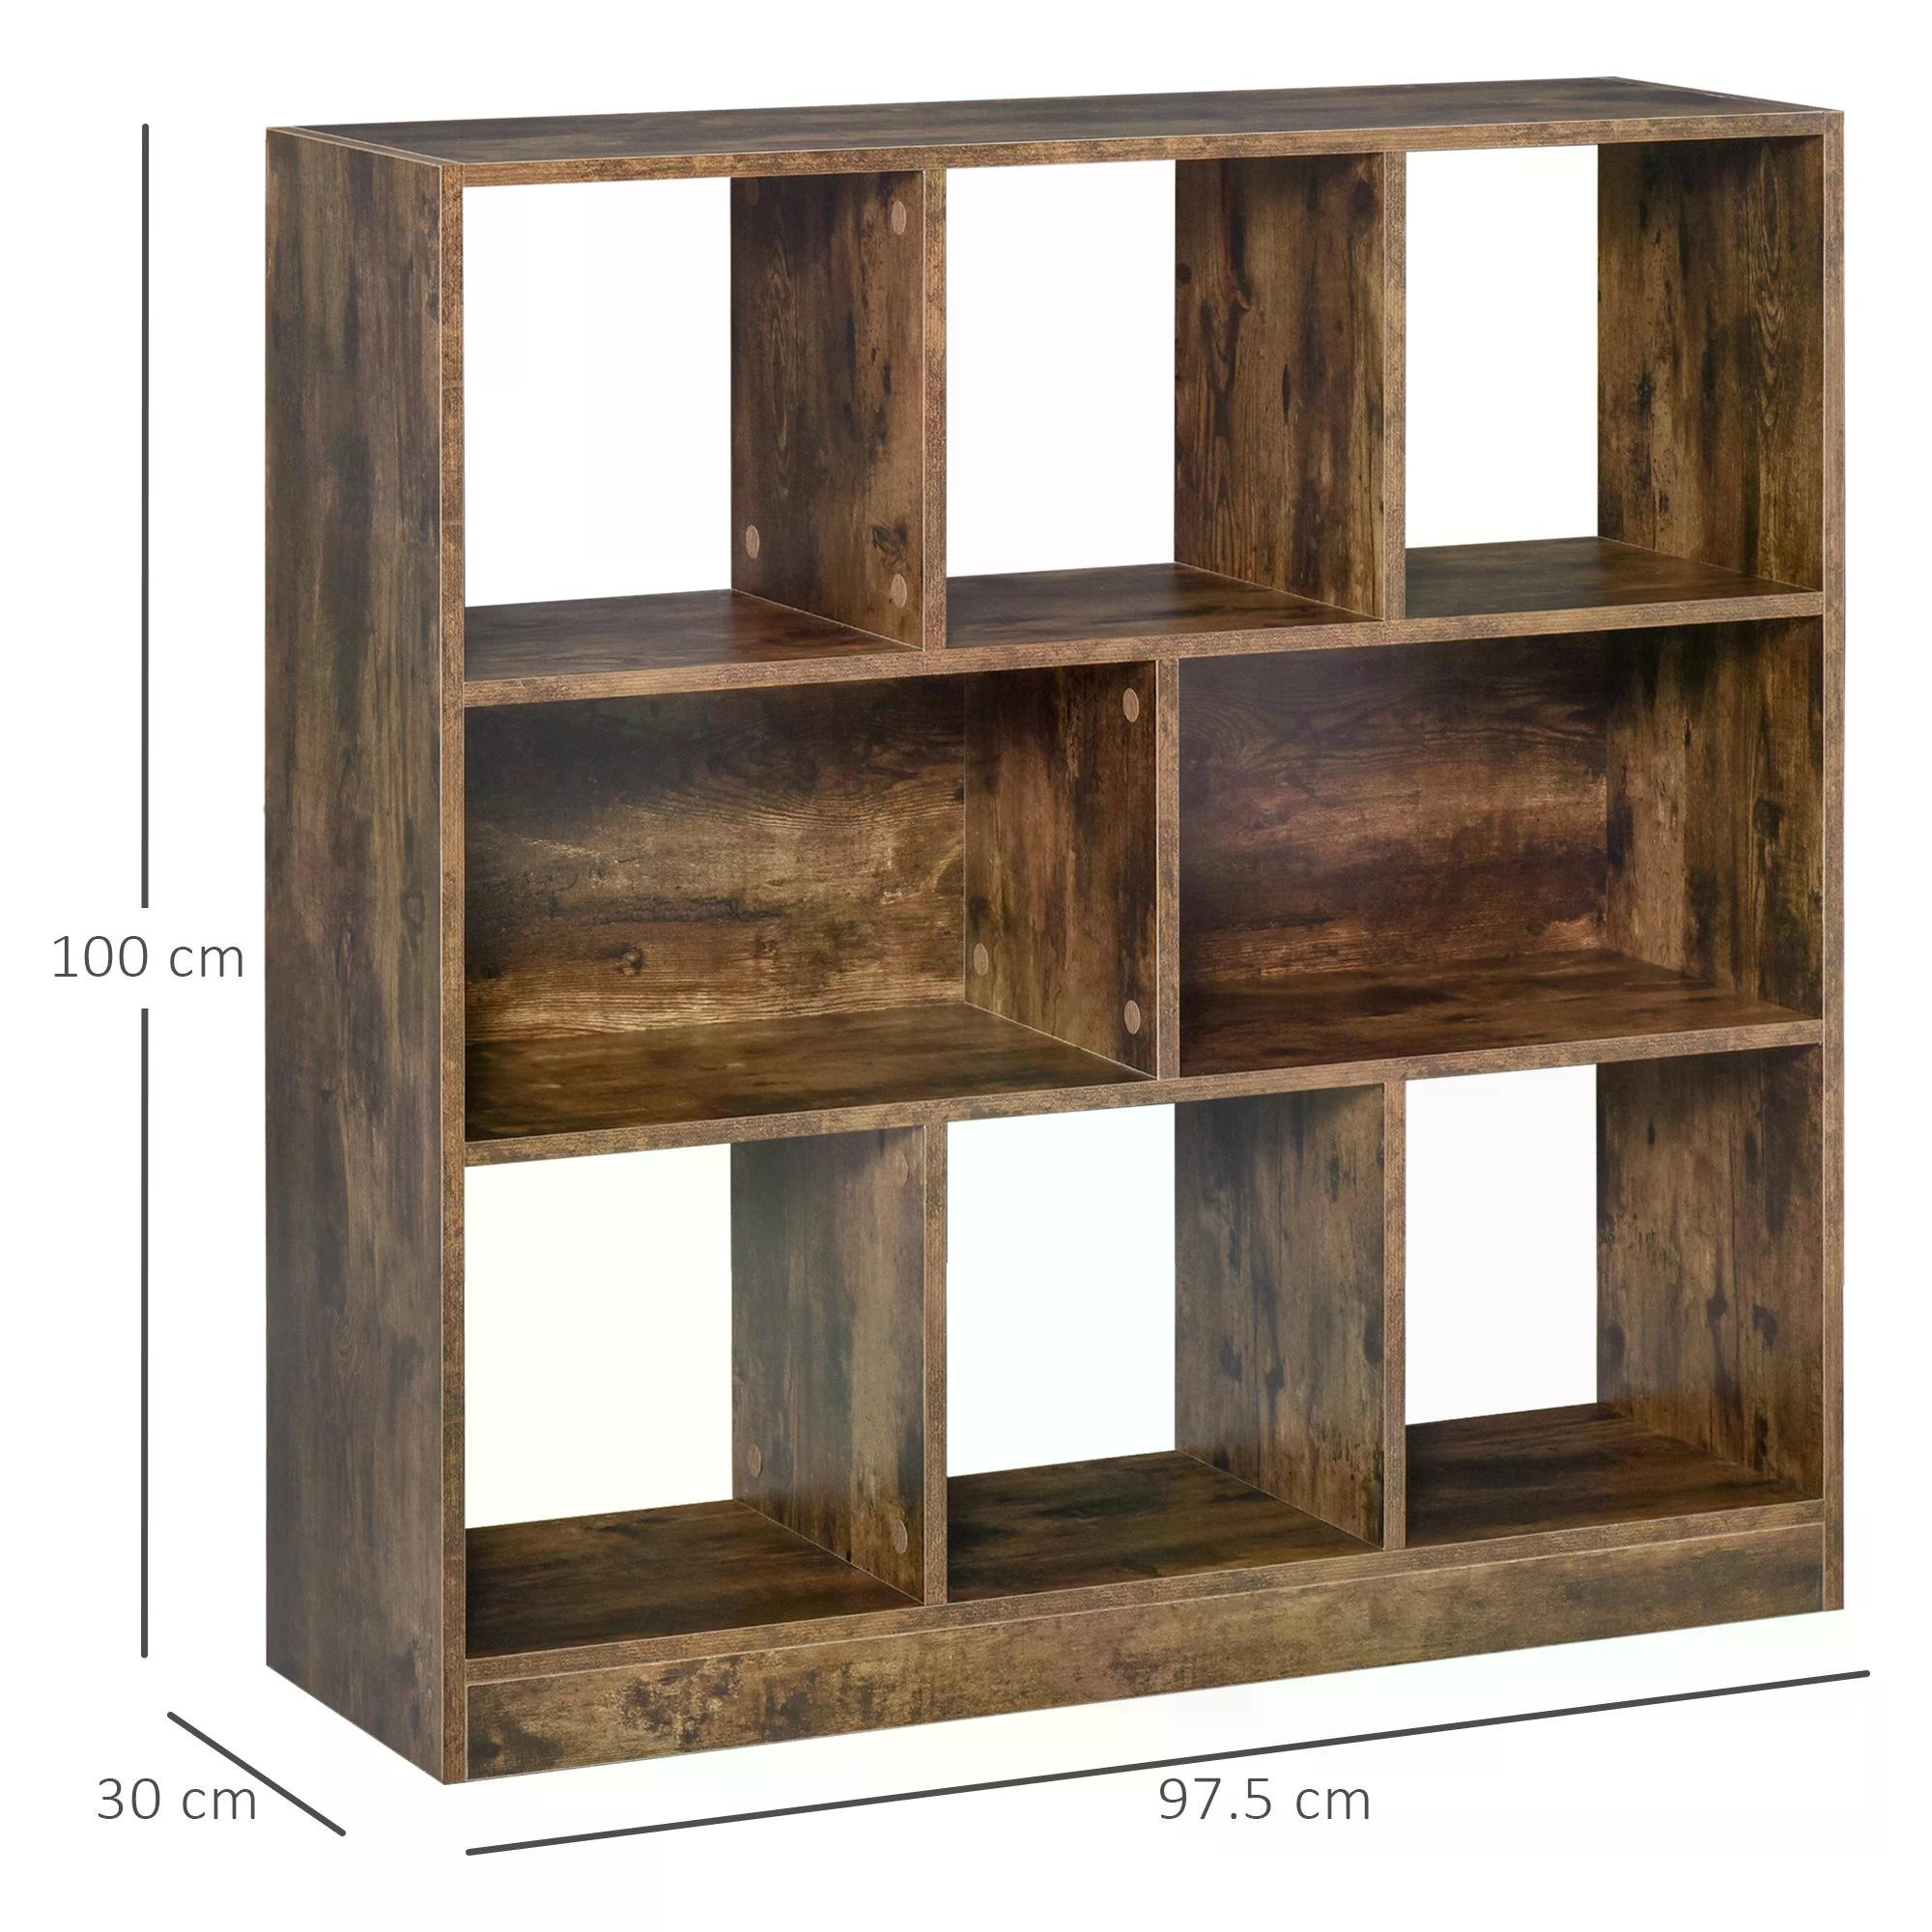 Storage Shelf 3-Tier Bookcase Display Rack Home Organizer for Home Office, Living Room, Playroom, Rustic Brown-2